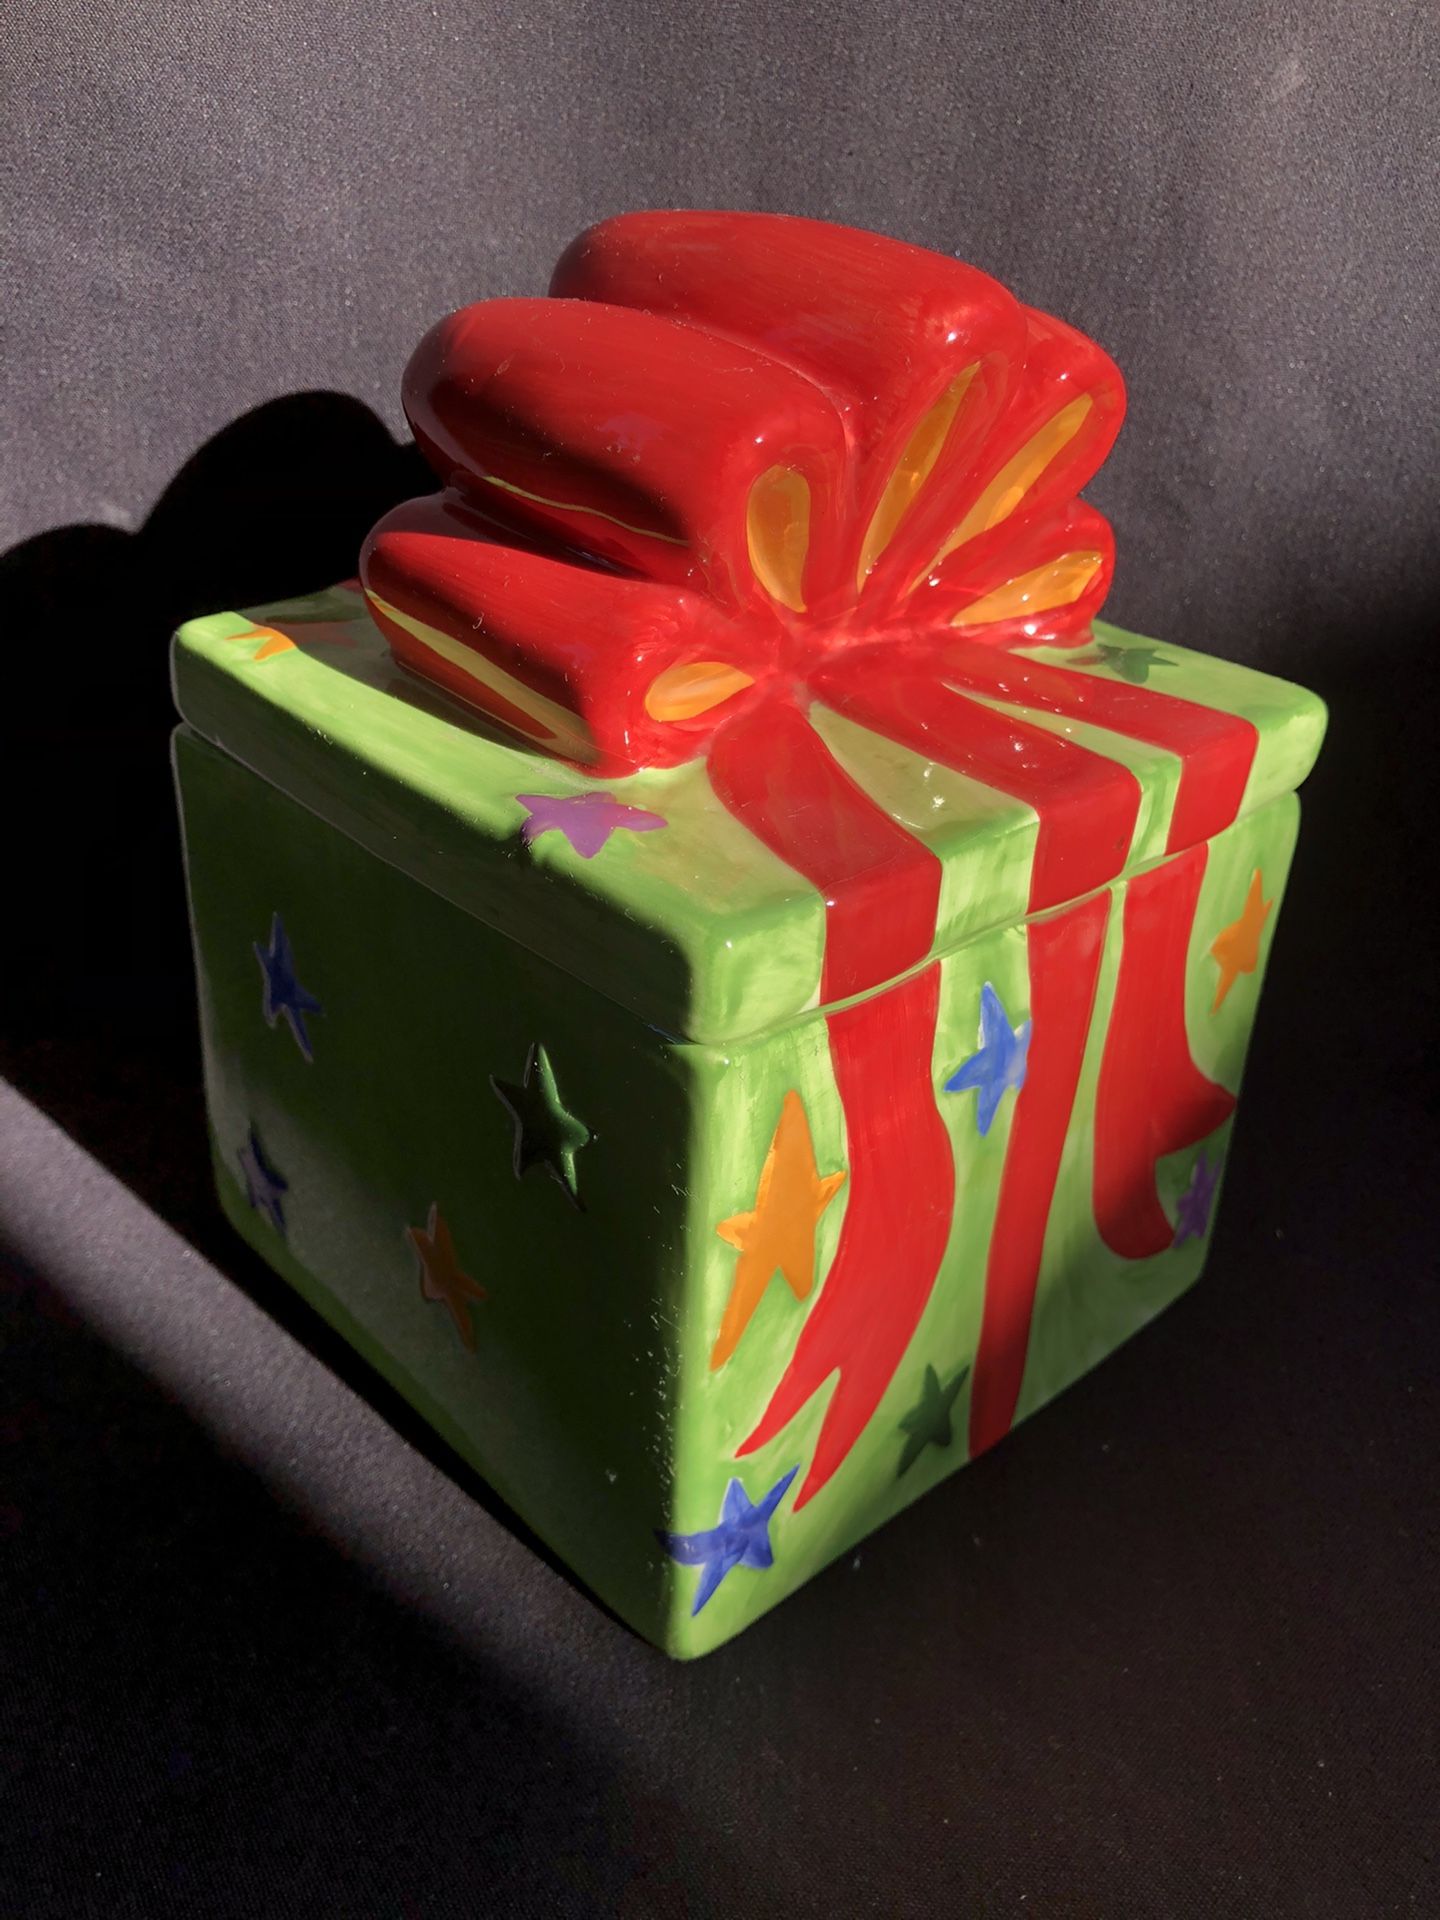 Red Bow Green Ceramic Christmas Present 7" Square Cookie Jar Gift Trinket Box